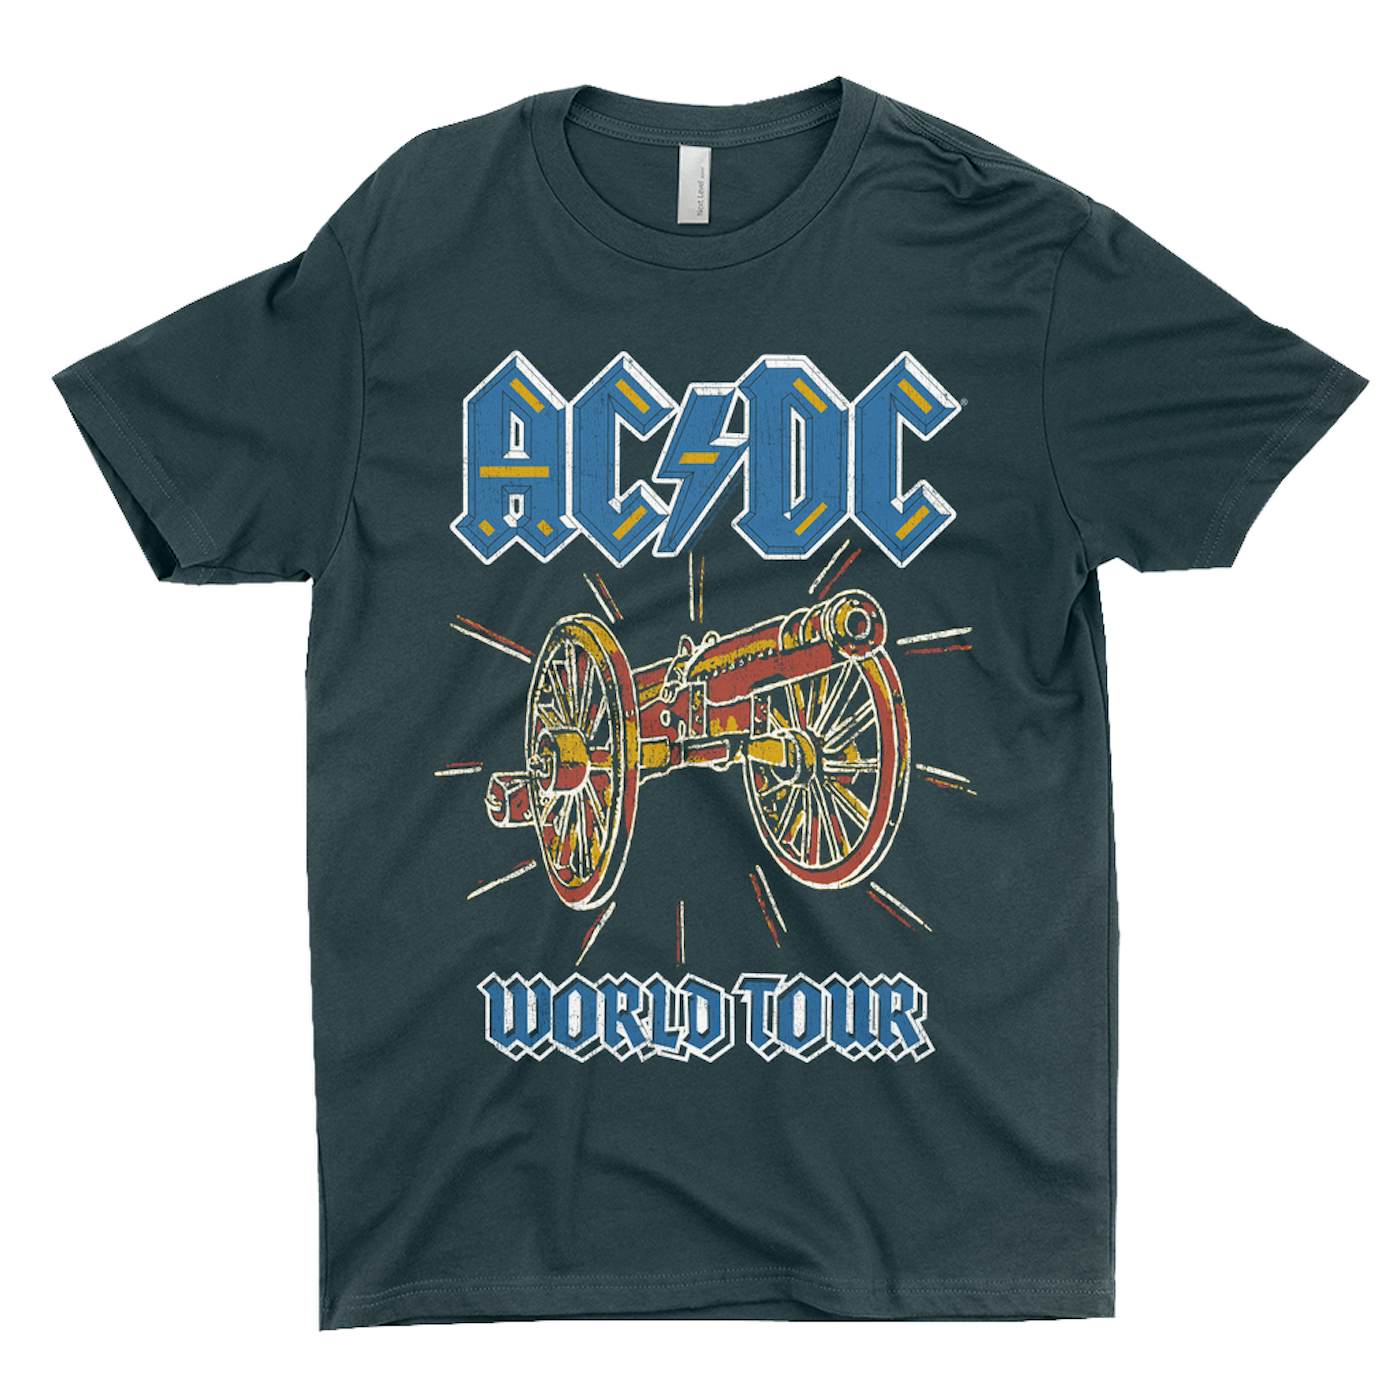 For Cannon Image About Tour To AC/DC World | Those T-Shirt Rock Shirt